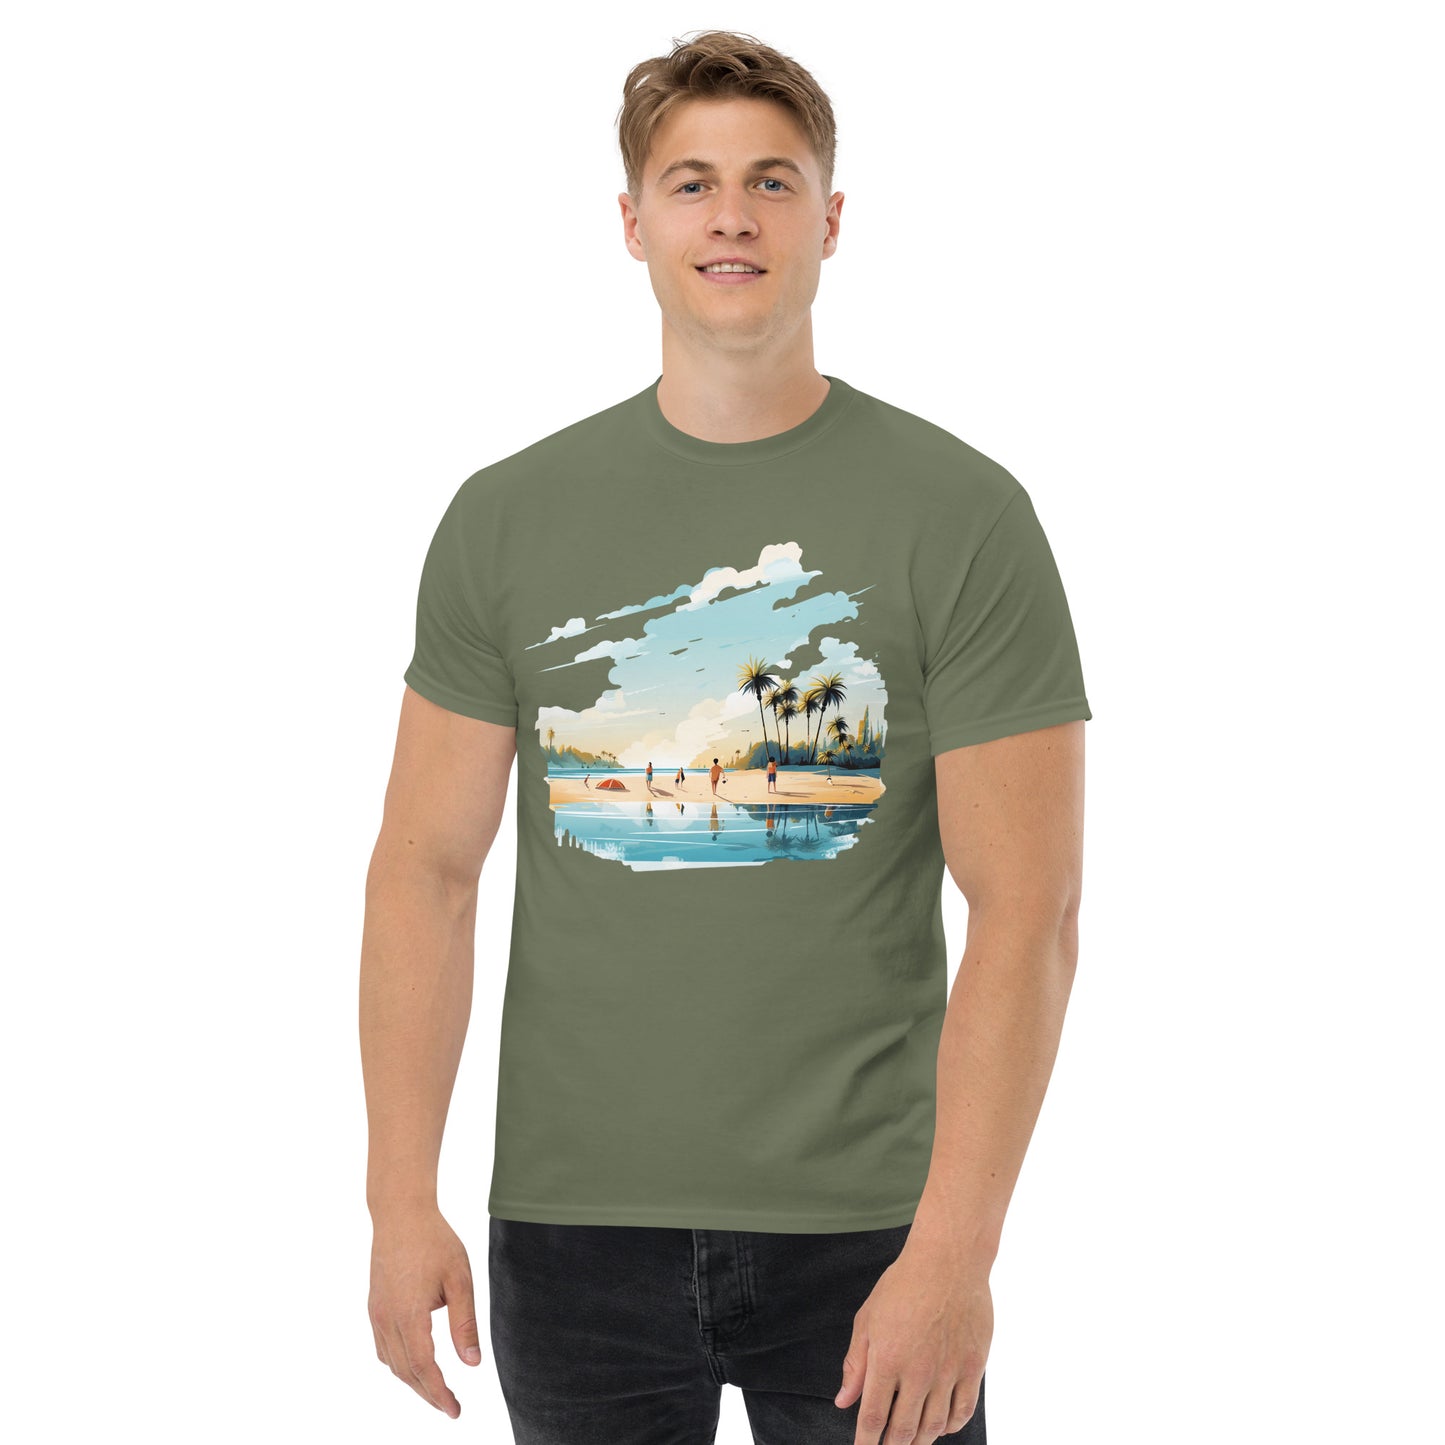 Men with military green T-shirt and a picture of a island with sea and sand